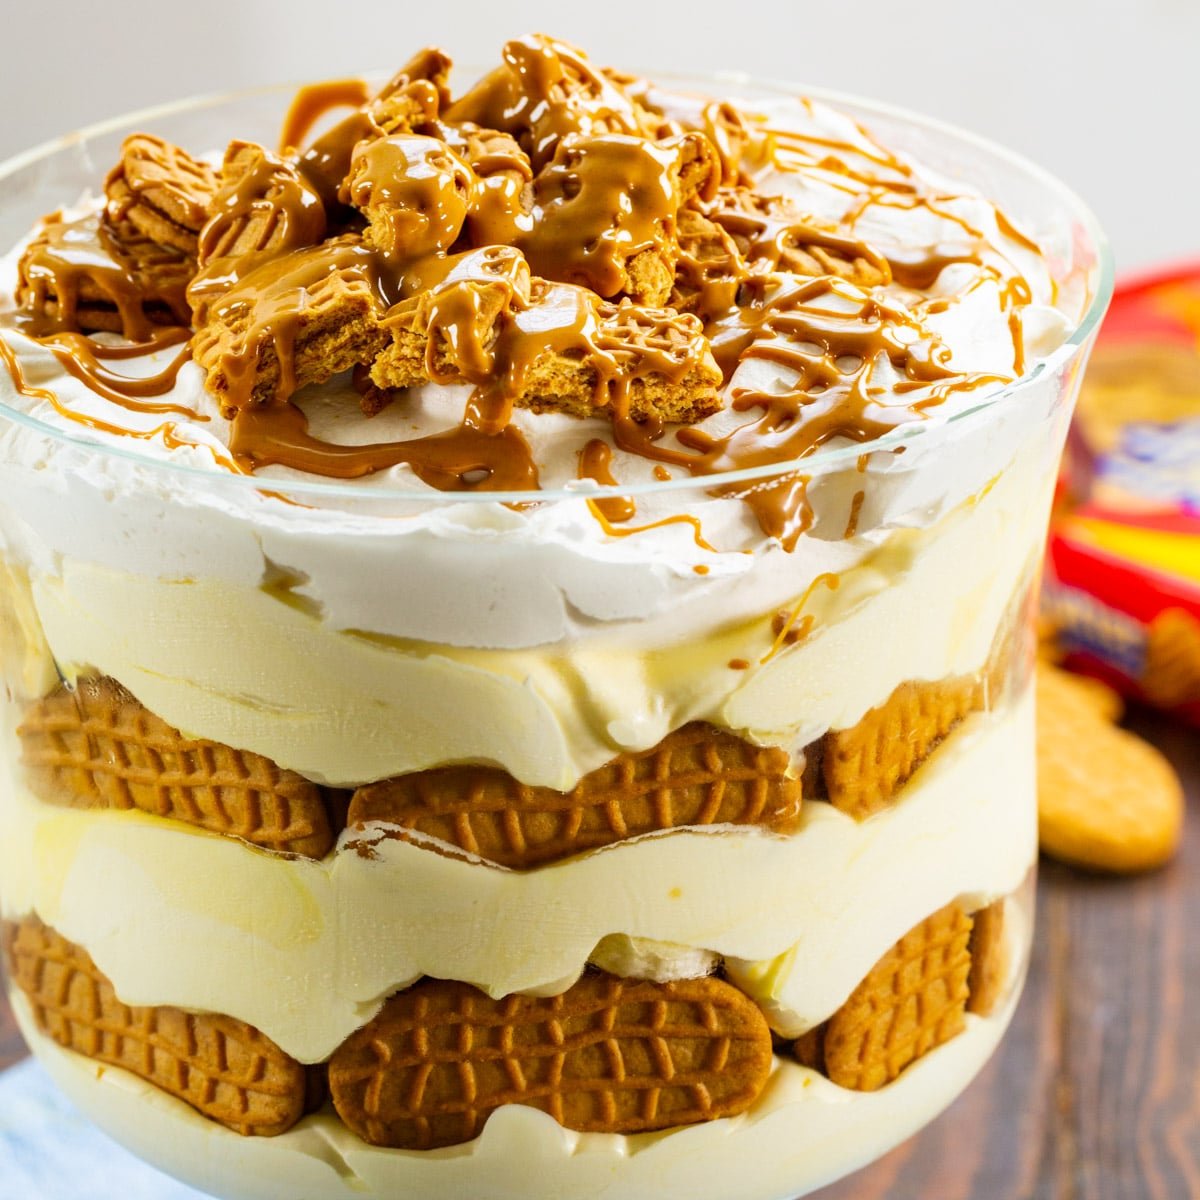 Nutter Butter Banana Pudding in a trifle dish.